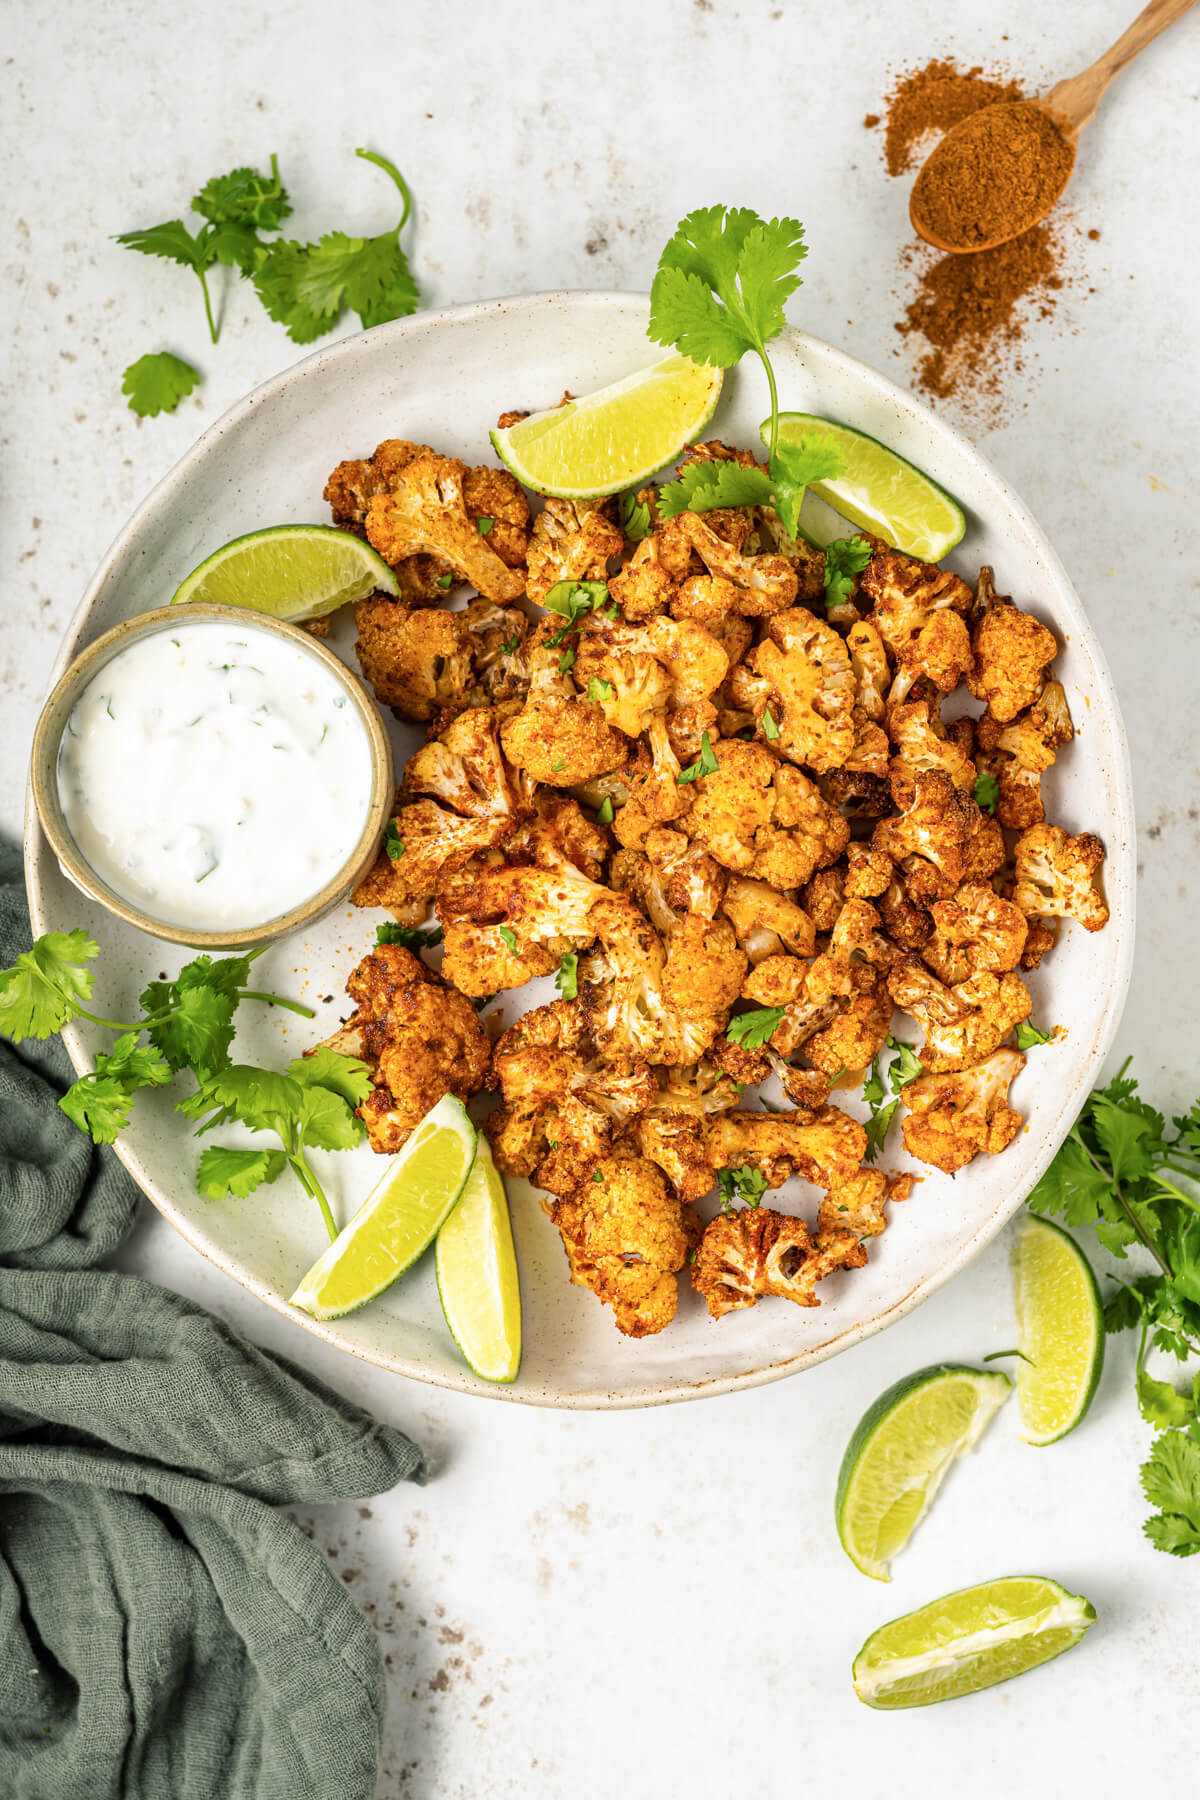 A plate of vibrant curried air fryer cauliflower beside a tiny bowl of creamy dip, cilantro, and lime wedges.